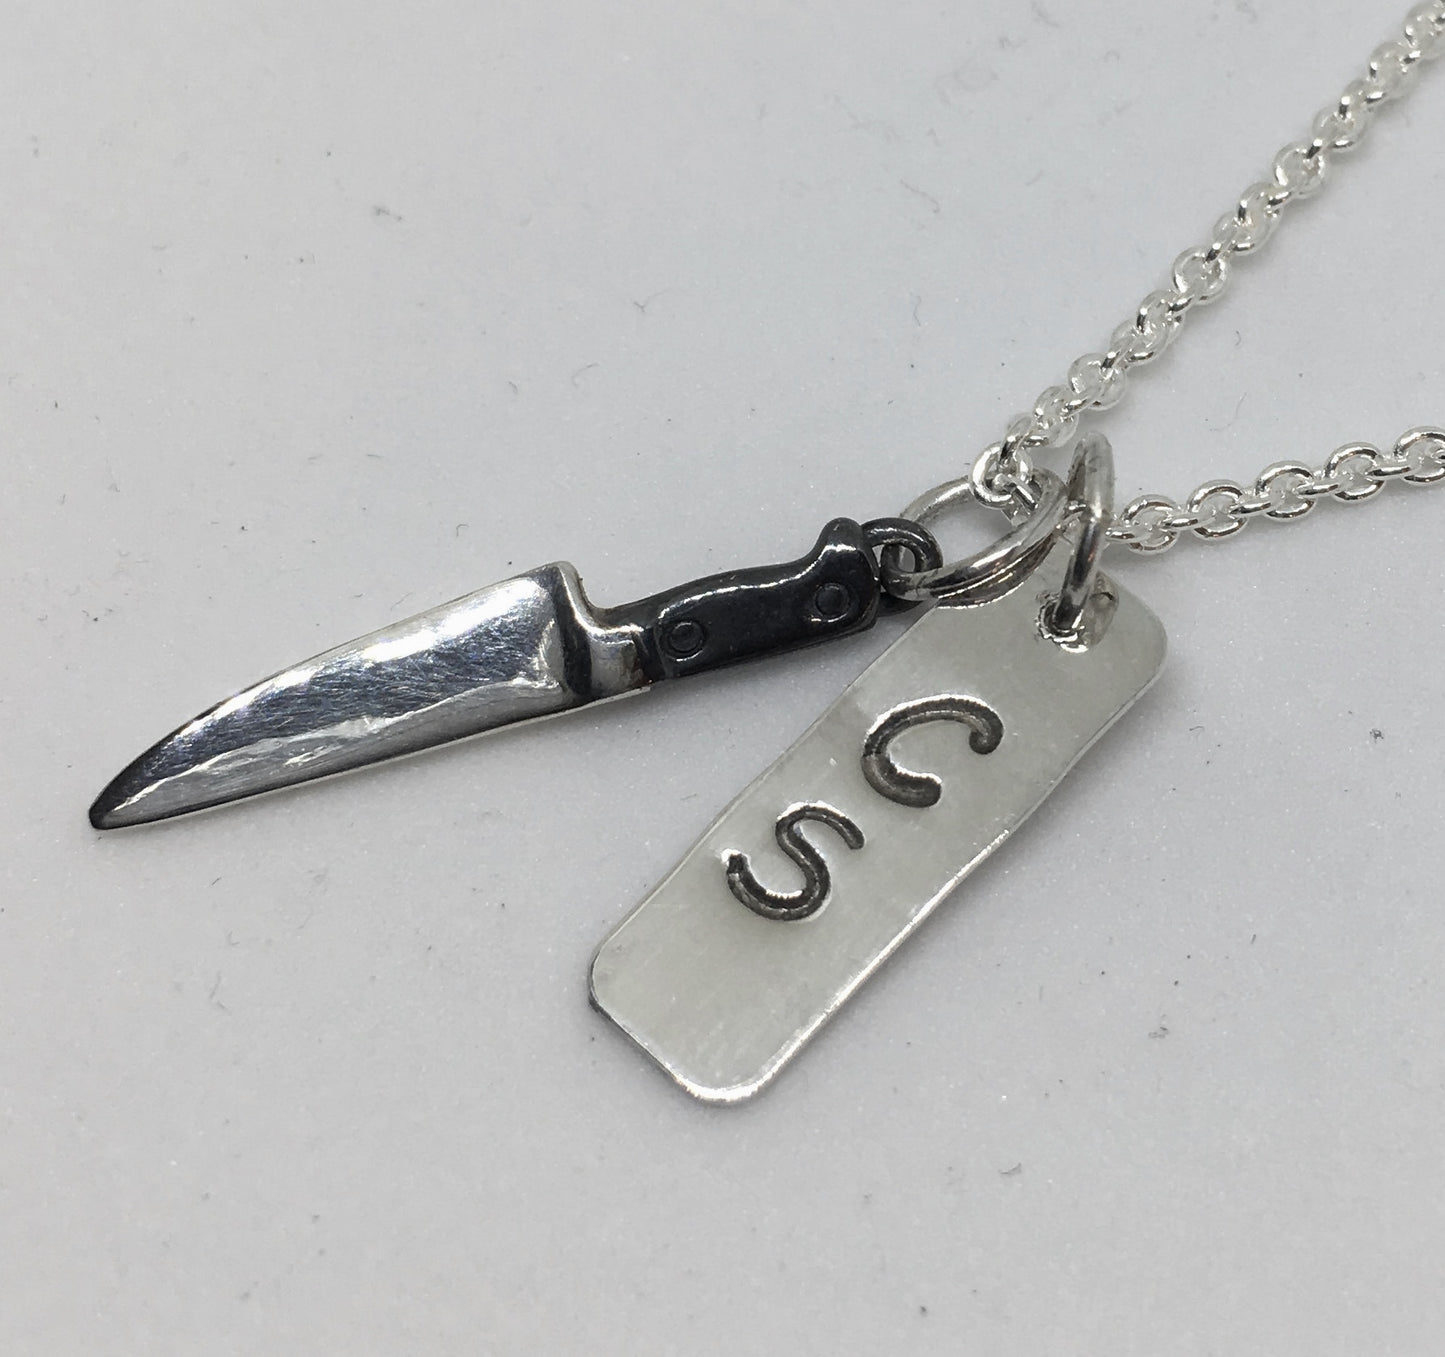 Personalized Chef Knife Pendant Necklace with Initials